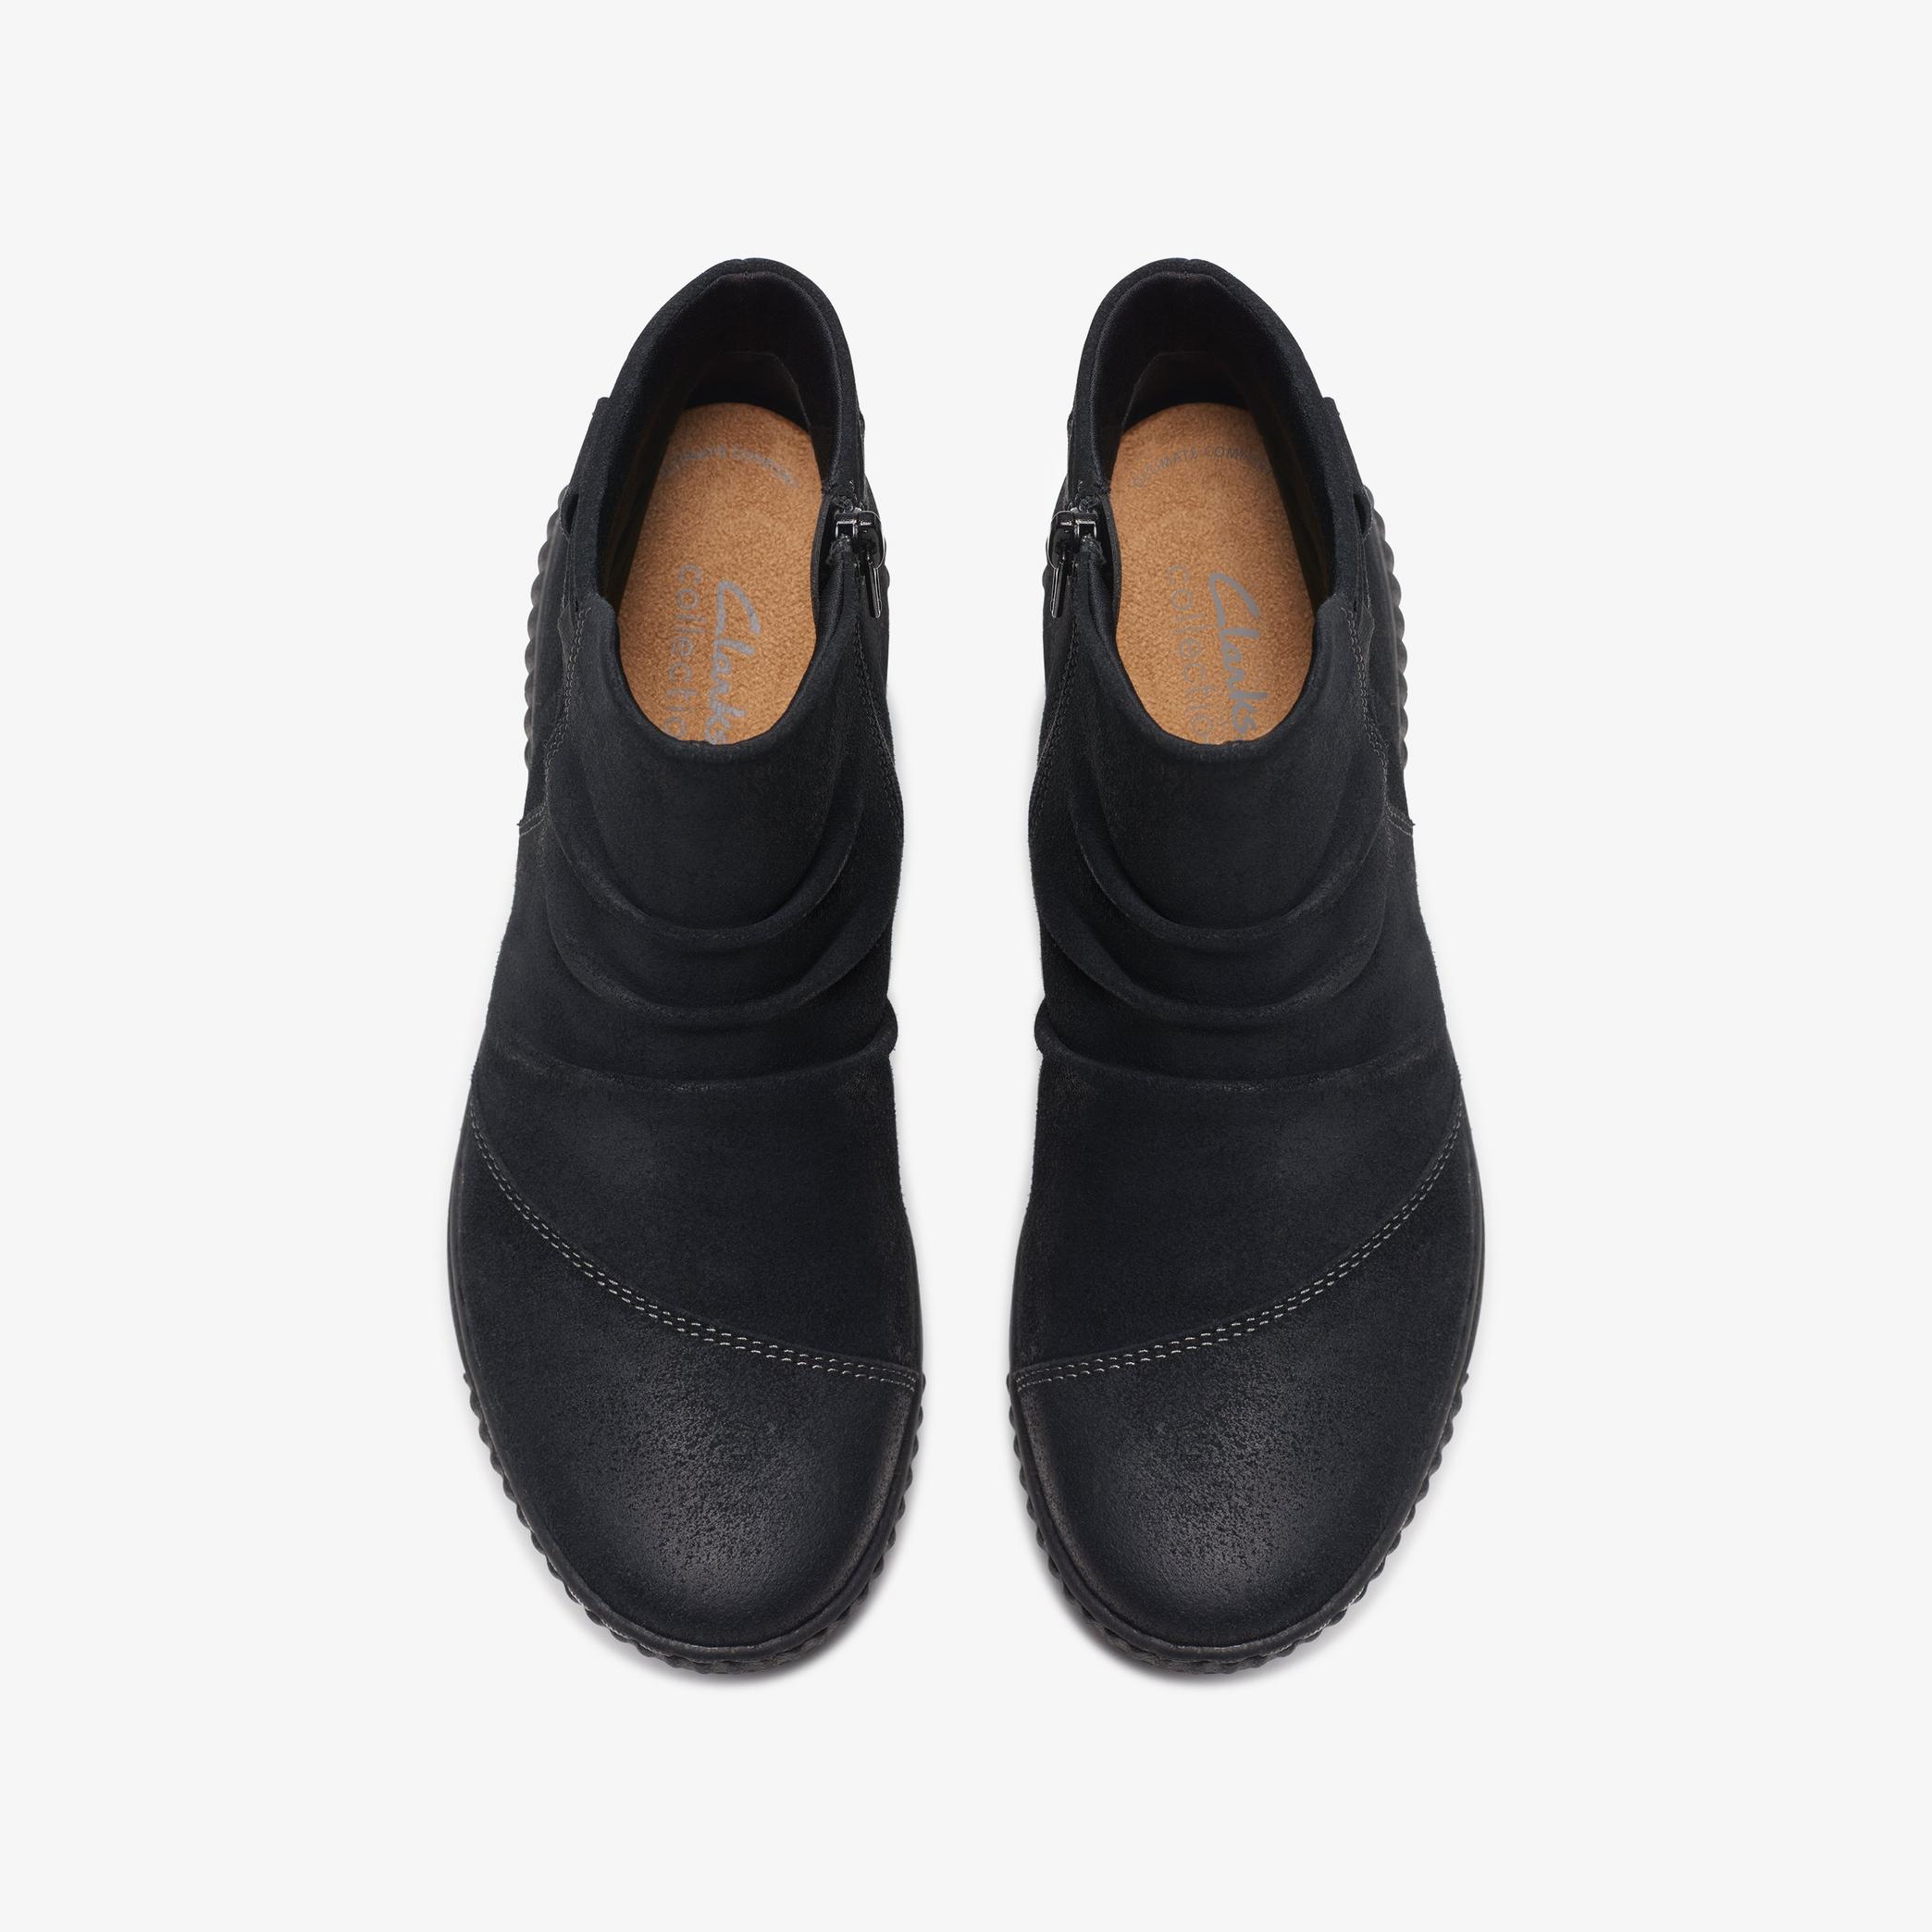 Caroline Derby Black Suede Ankle Boots, view 6 of 6